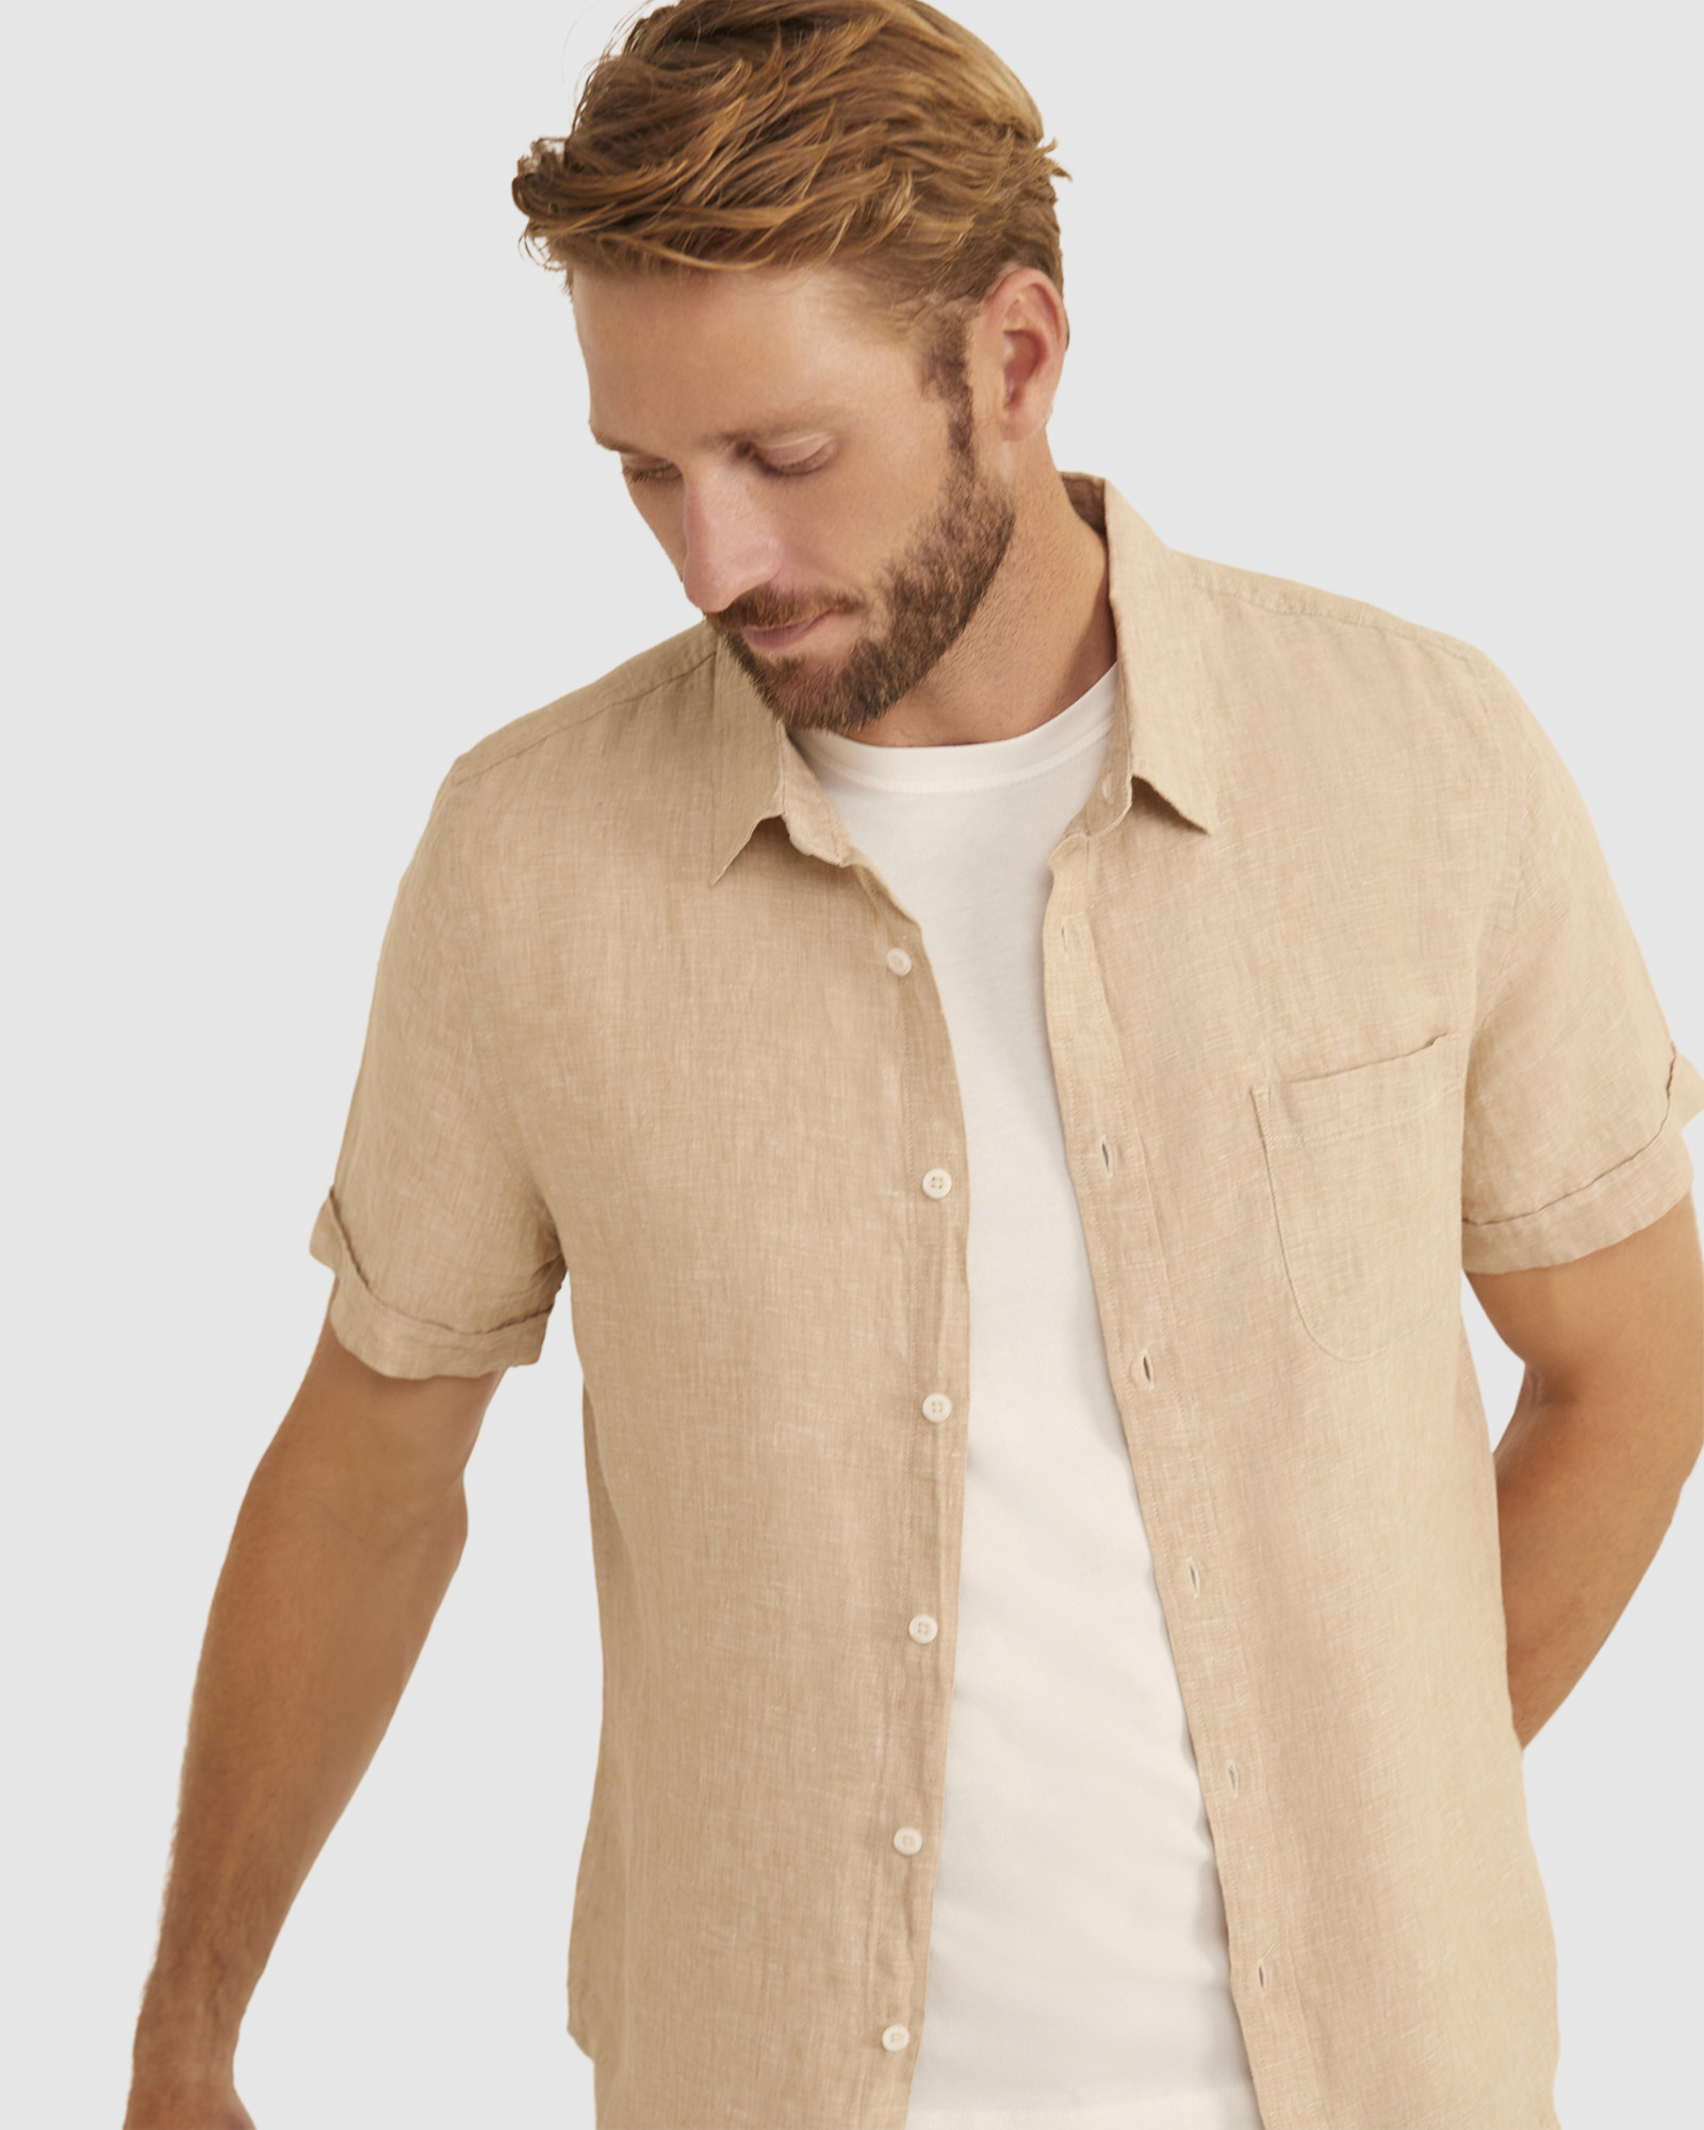 Yarn Dyed Linen Short Sleeve Shirt in LIGHT TAUPE